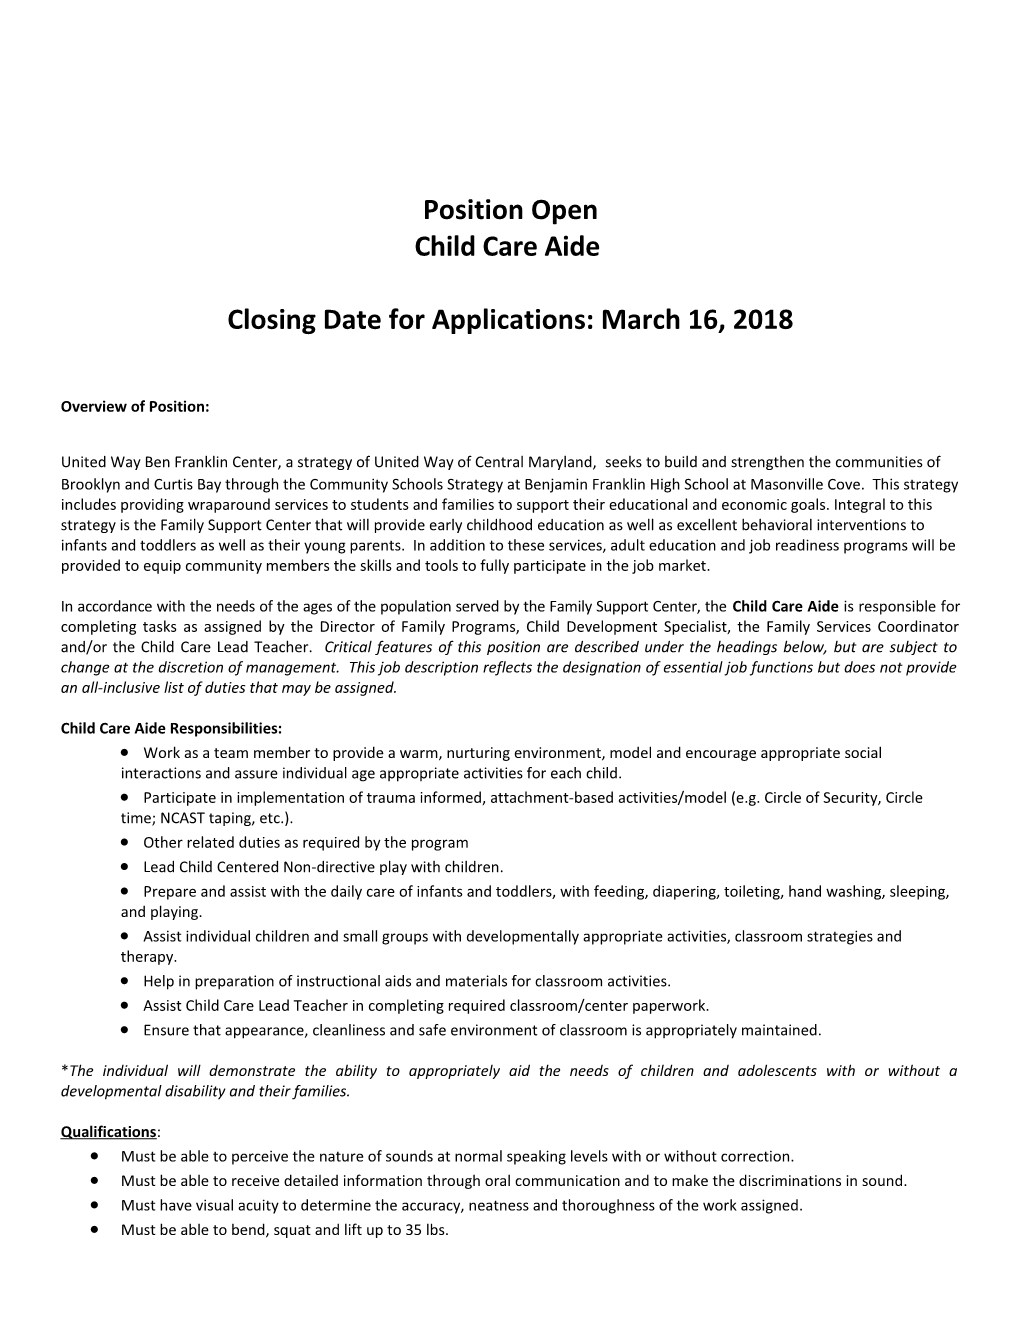 Closing Date for Applications: March 16, 2018